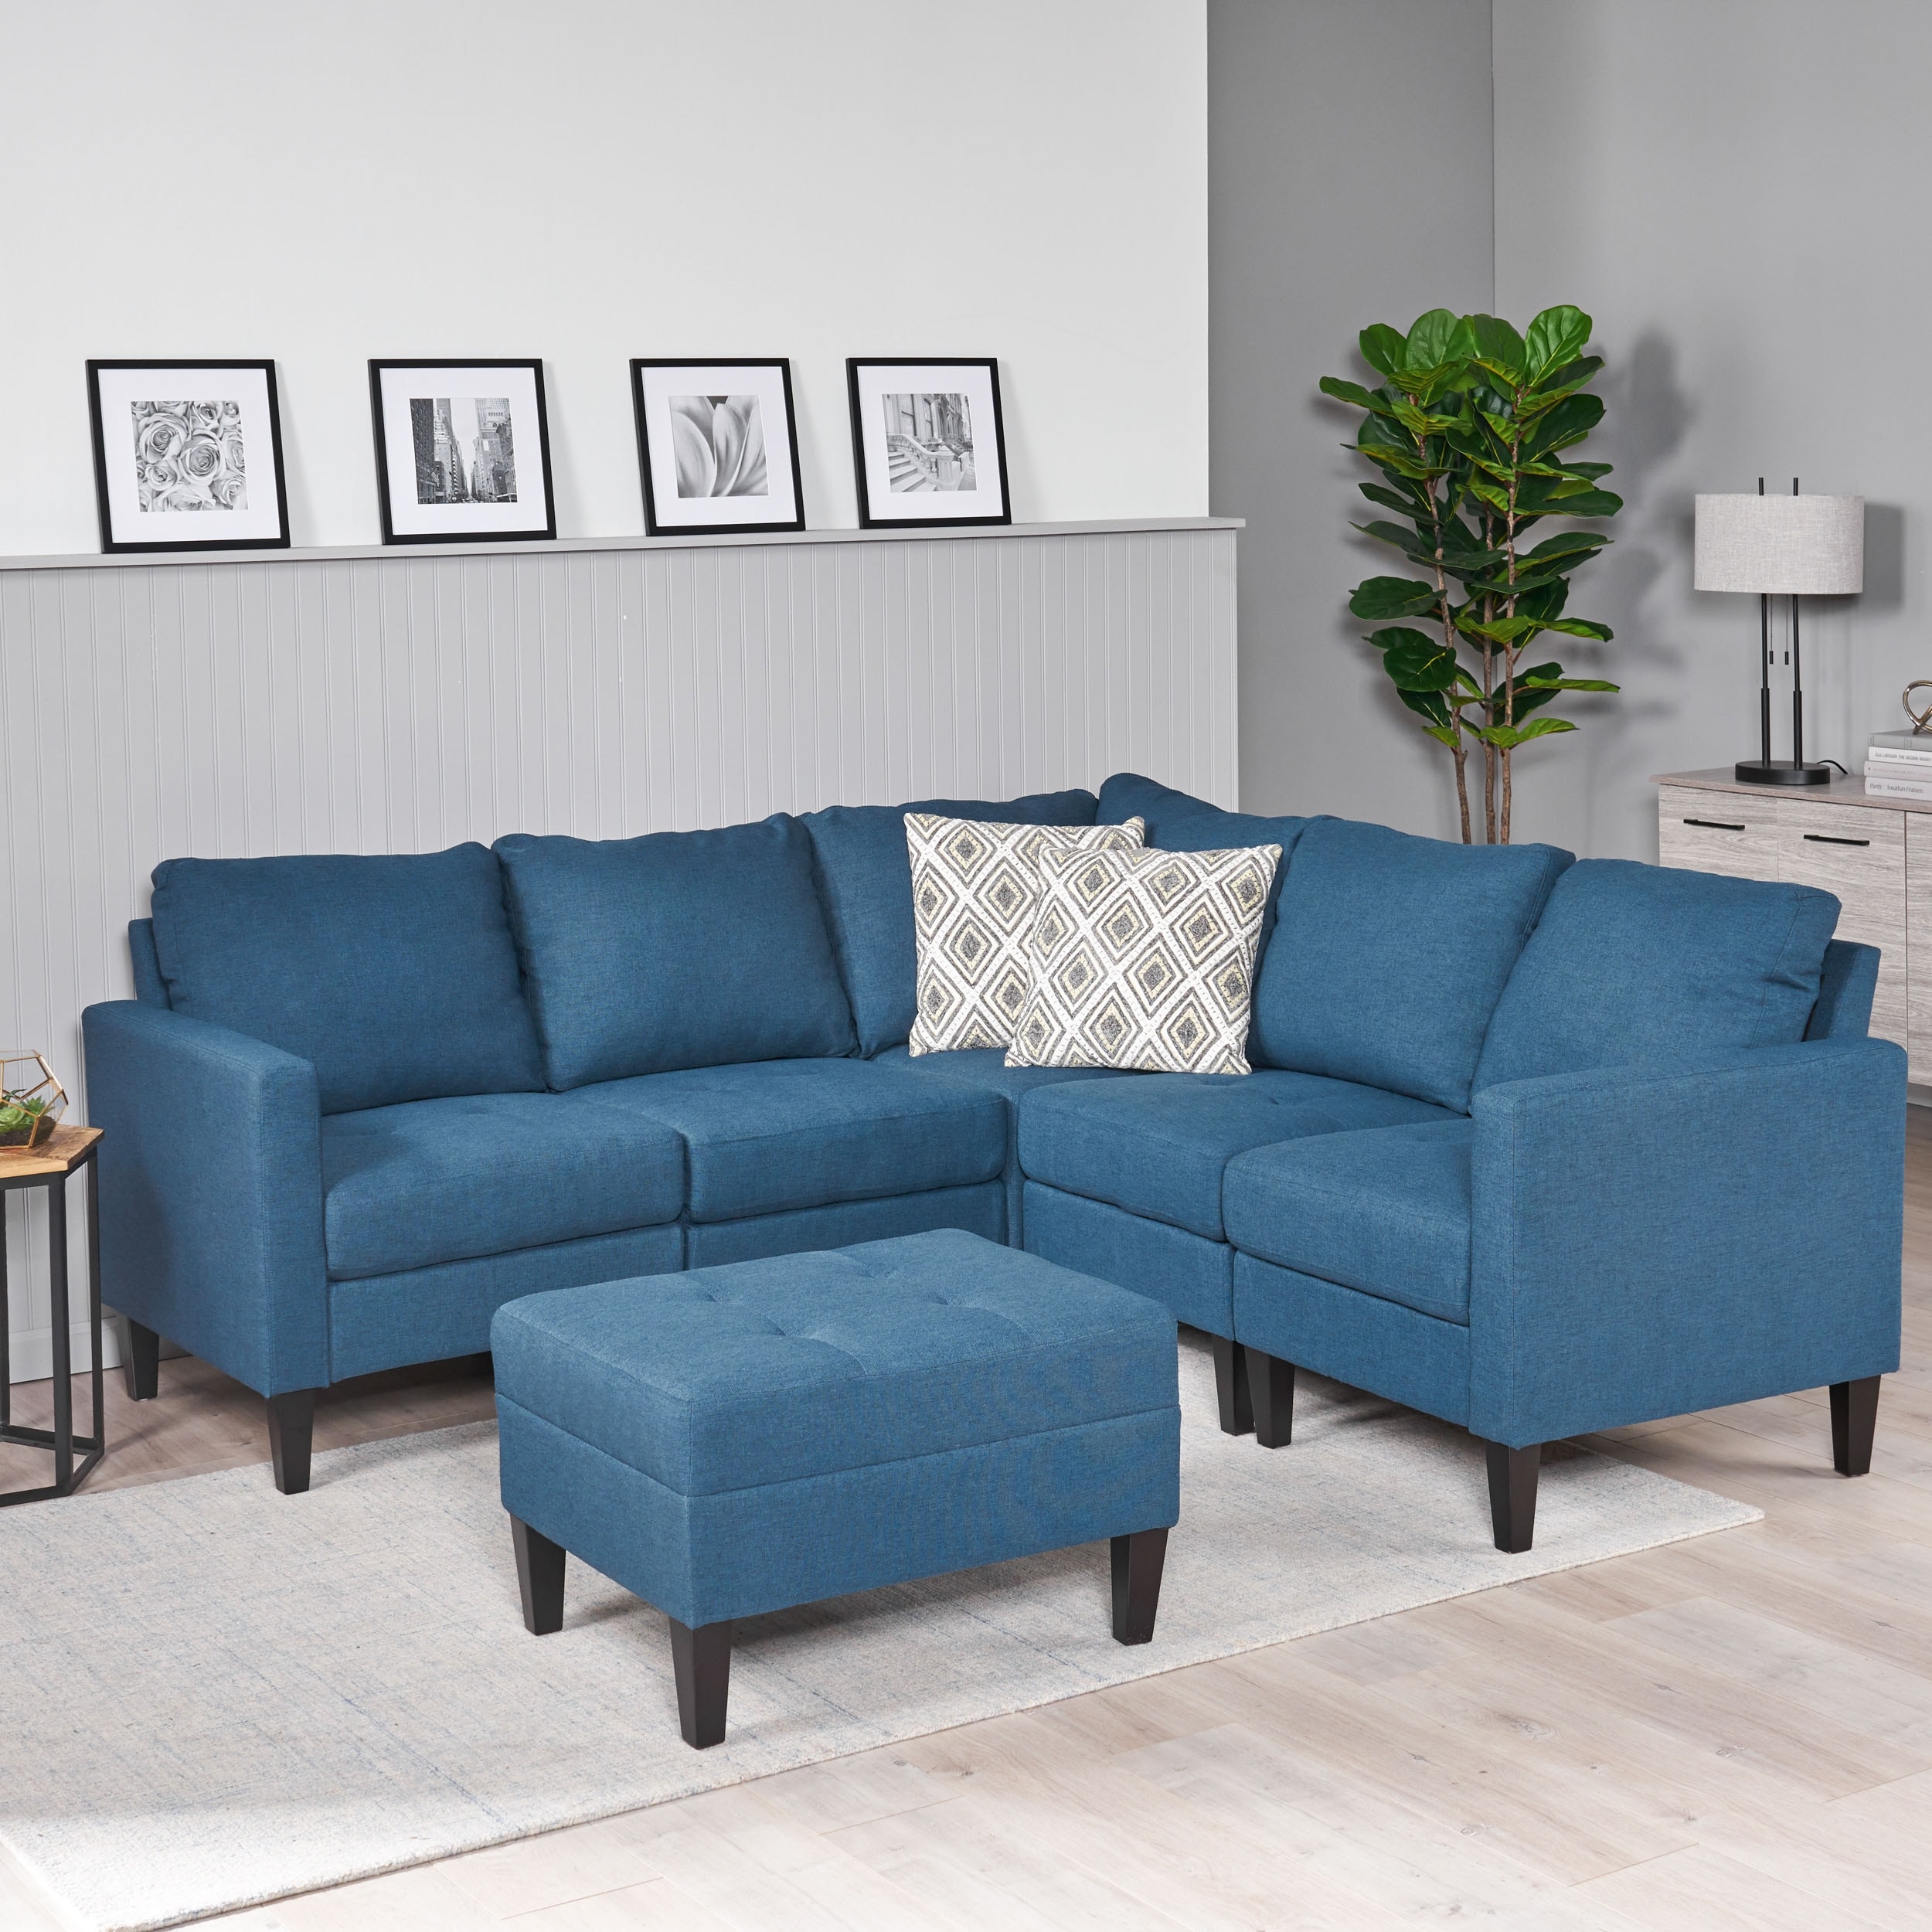 Christopher Knight Home Zahra 6-piece Fabric Sofa Sectional with Storage Ottoman